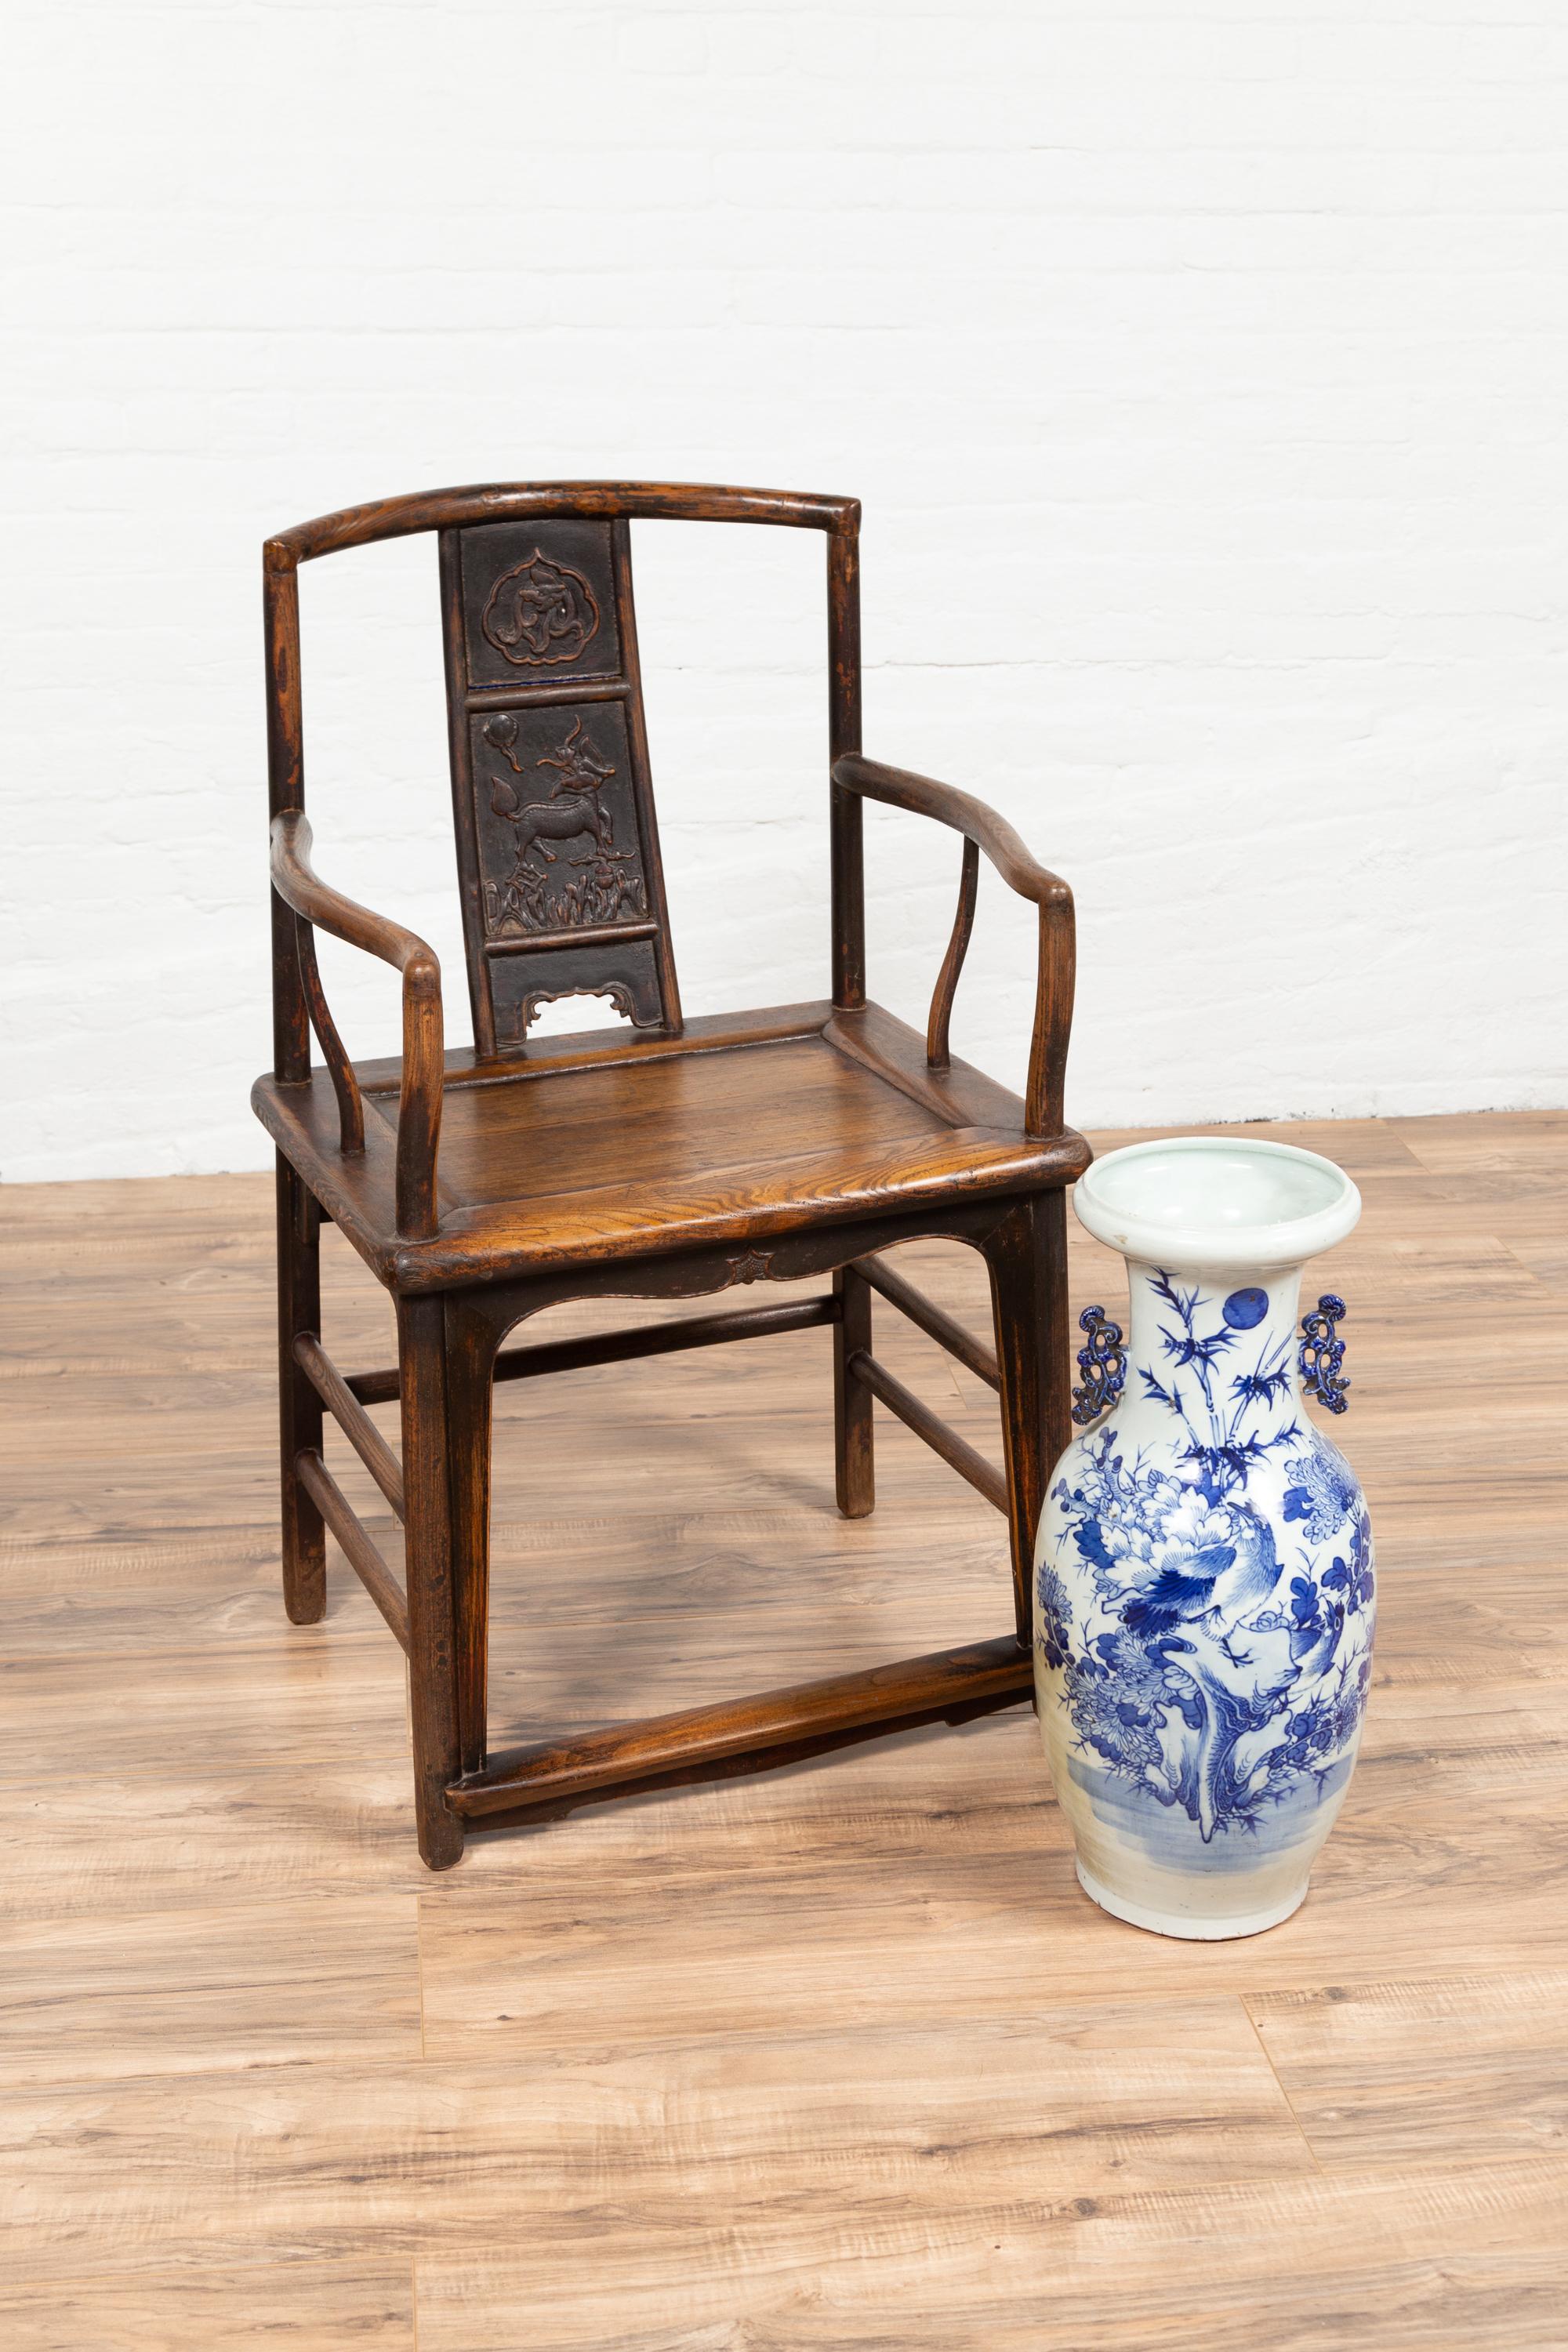 A Ming Dynasty style elmwood wedding chair from circa 1900, with carved panels on the splat, curved arms, and gooseneck front posts. This early 20th-century Ming Dynasty style wedding chair, crafted from elmwood, embodies the essence of traditional